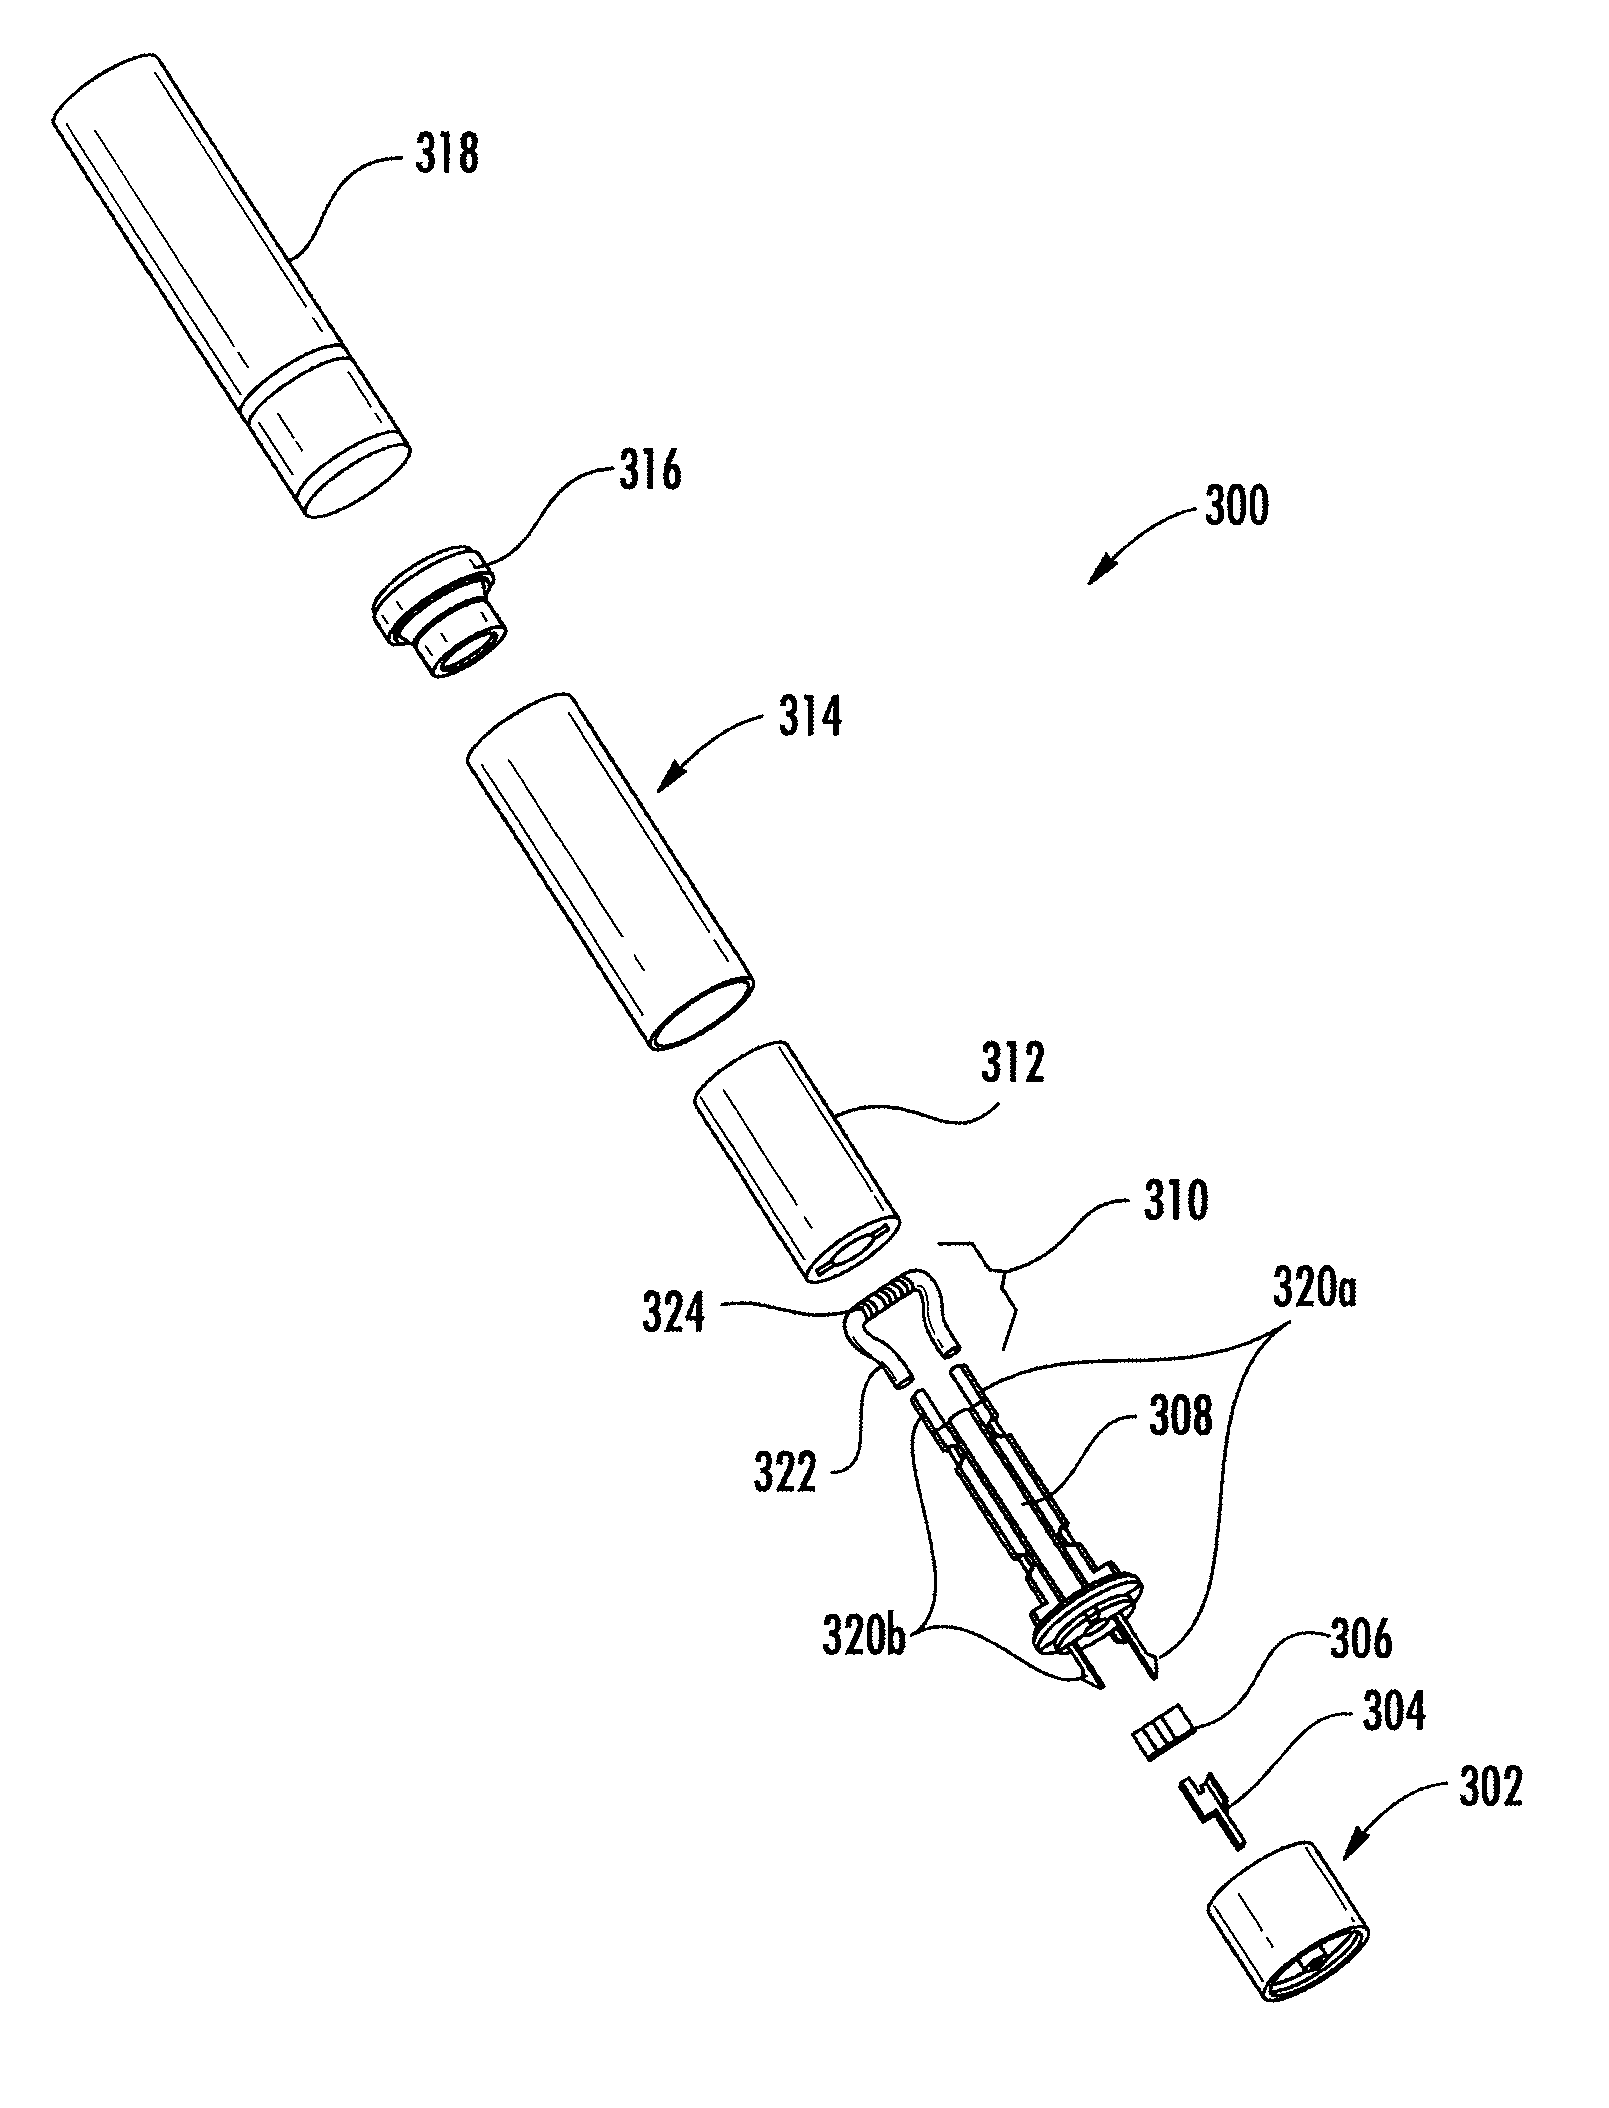 Sealed Cartridge for an Aerosol Delivery Device and Related Assembly Method